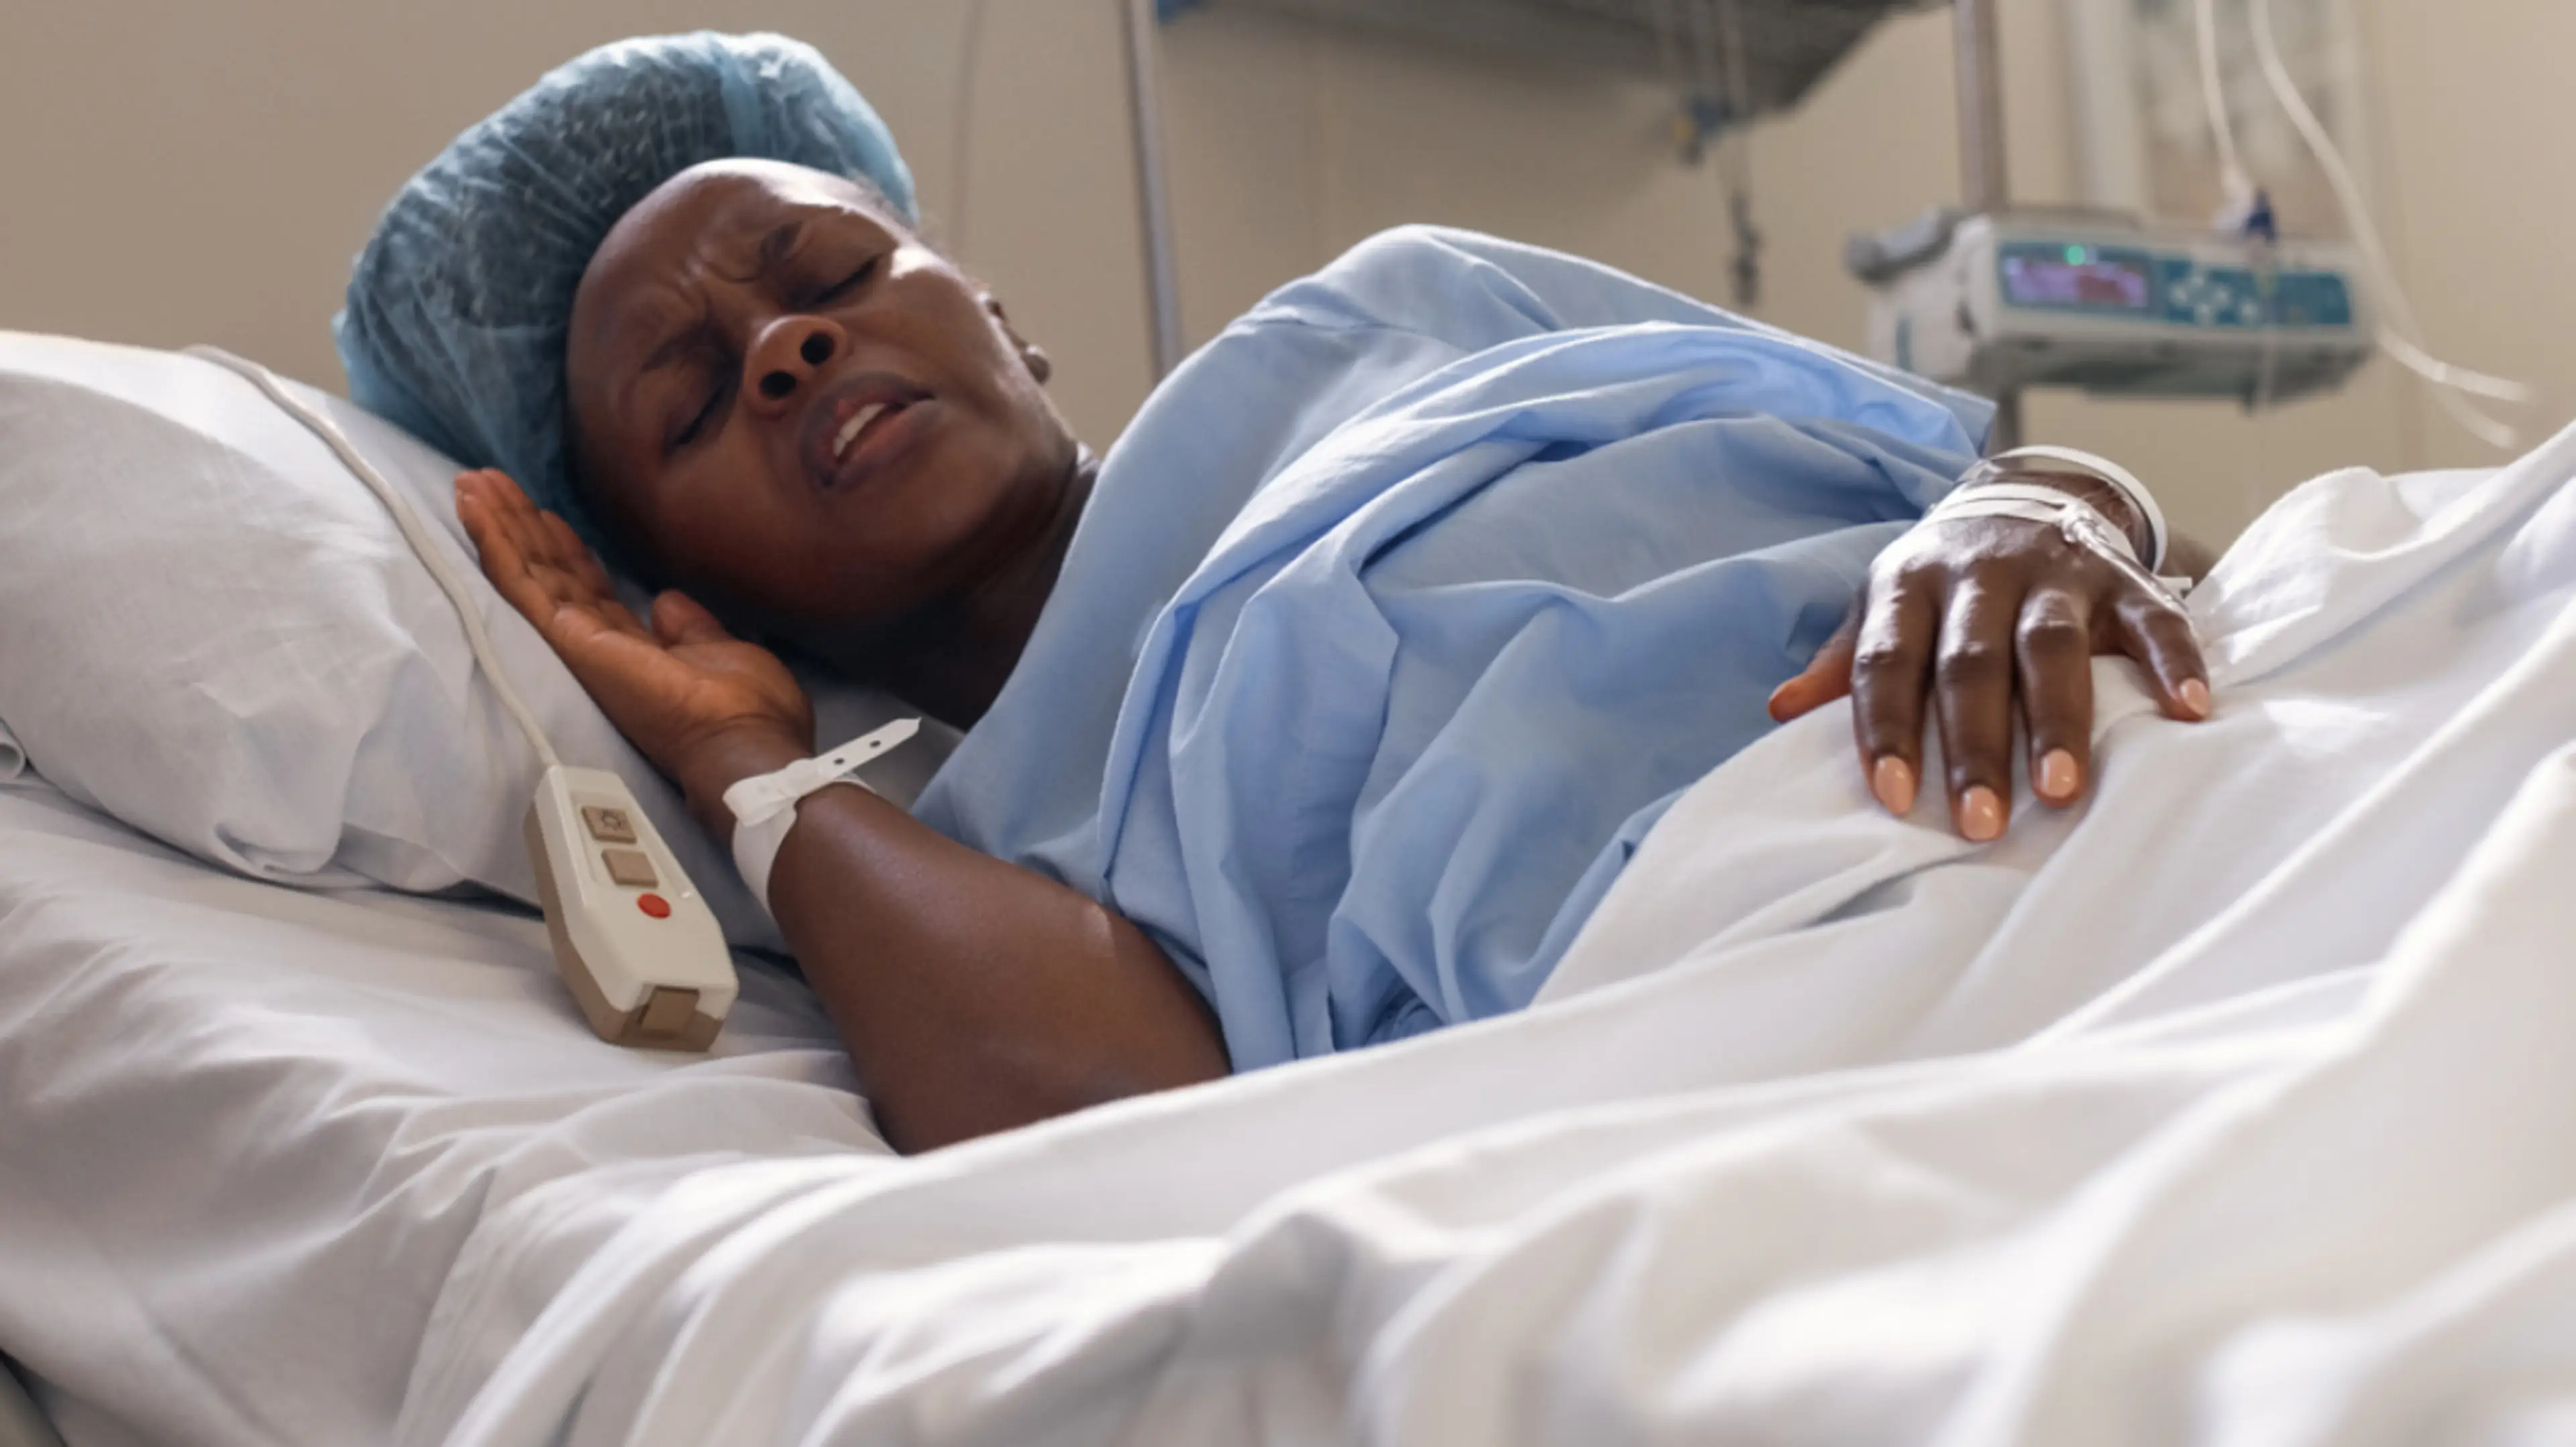 Everything You Need To Know Before Getting an Epidural